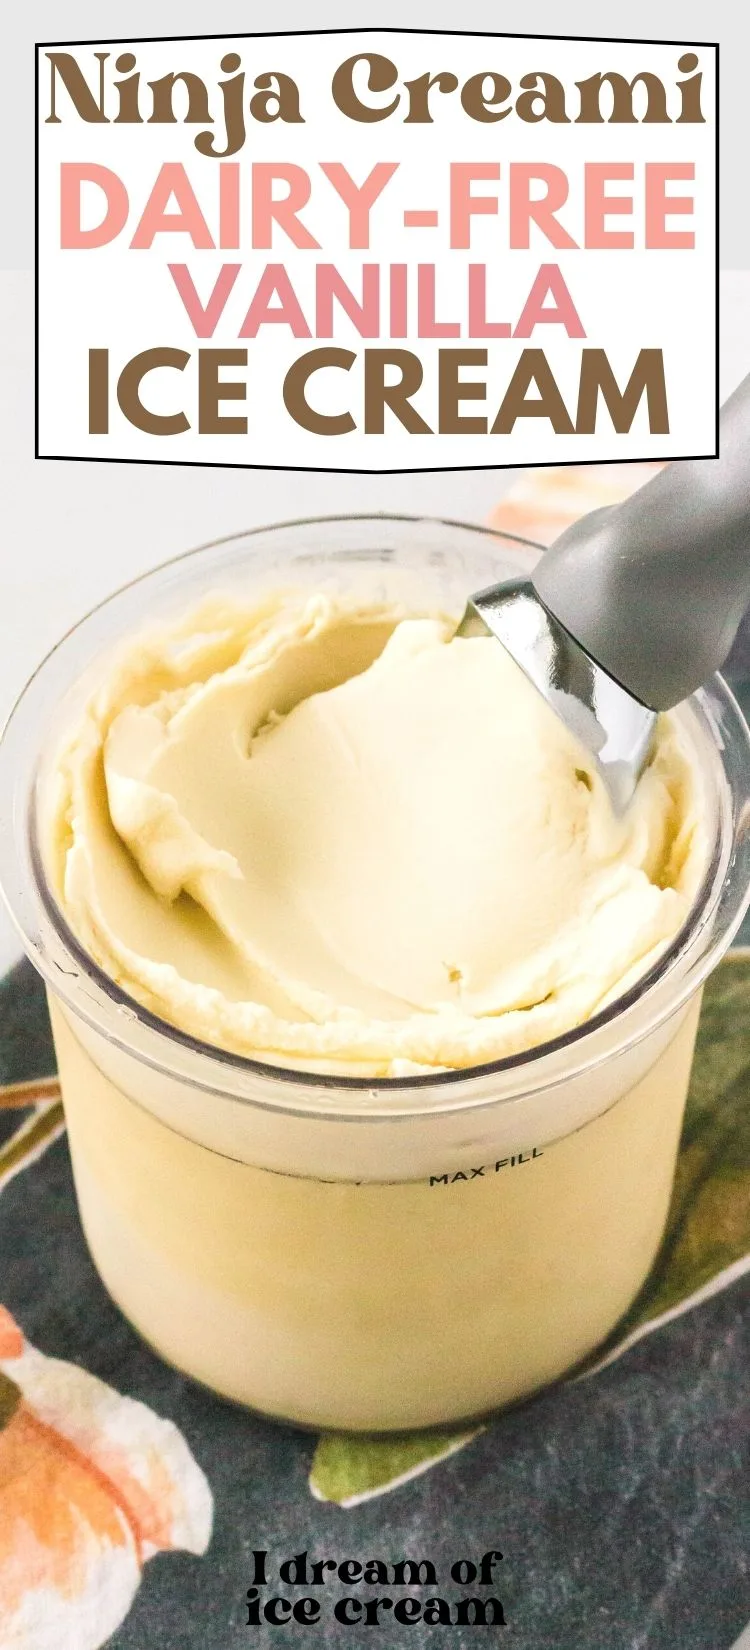 ninja creami pint container filled with dairy-free vanilla ice cream. An ice cream scoop is in the pint.